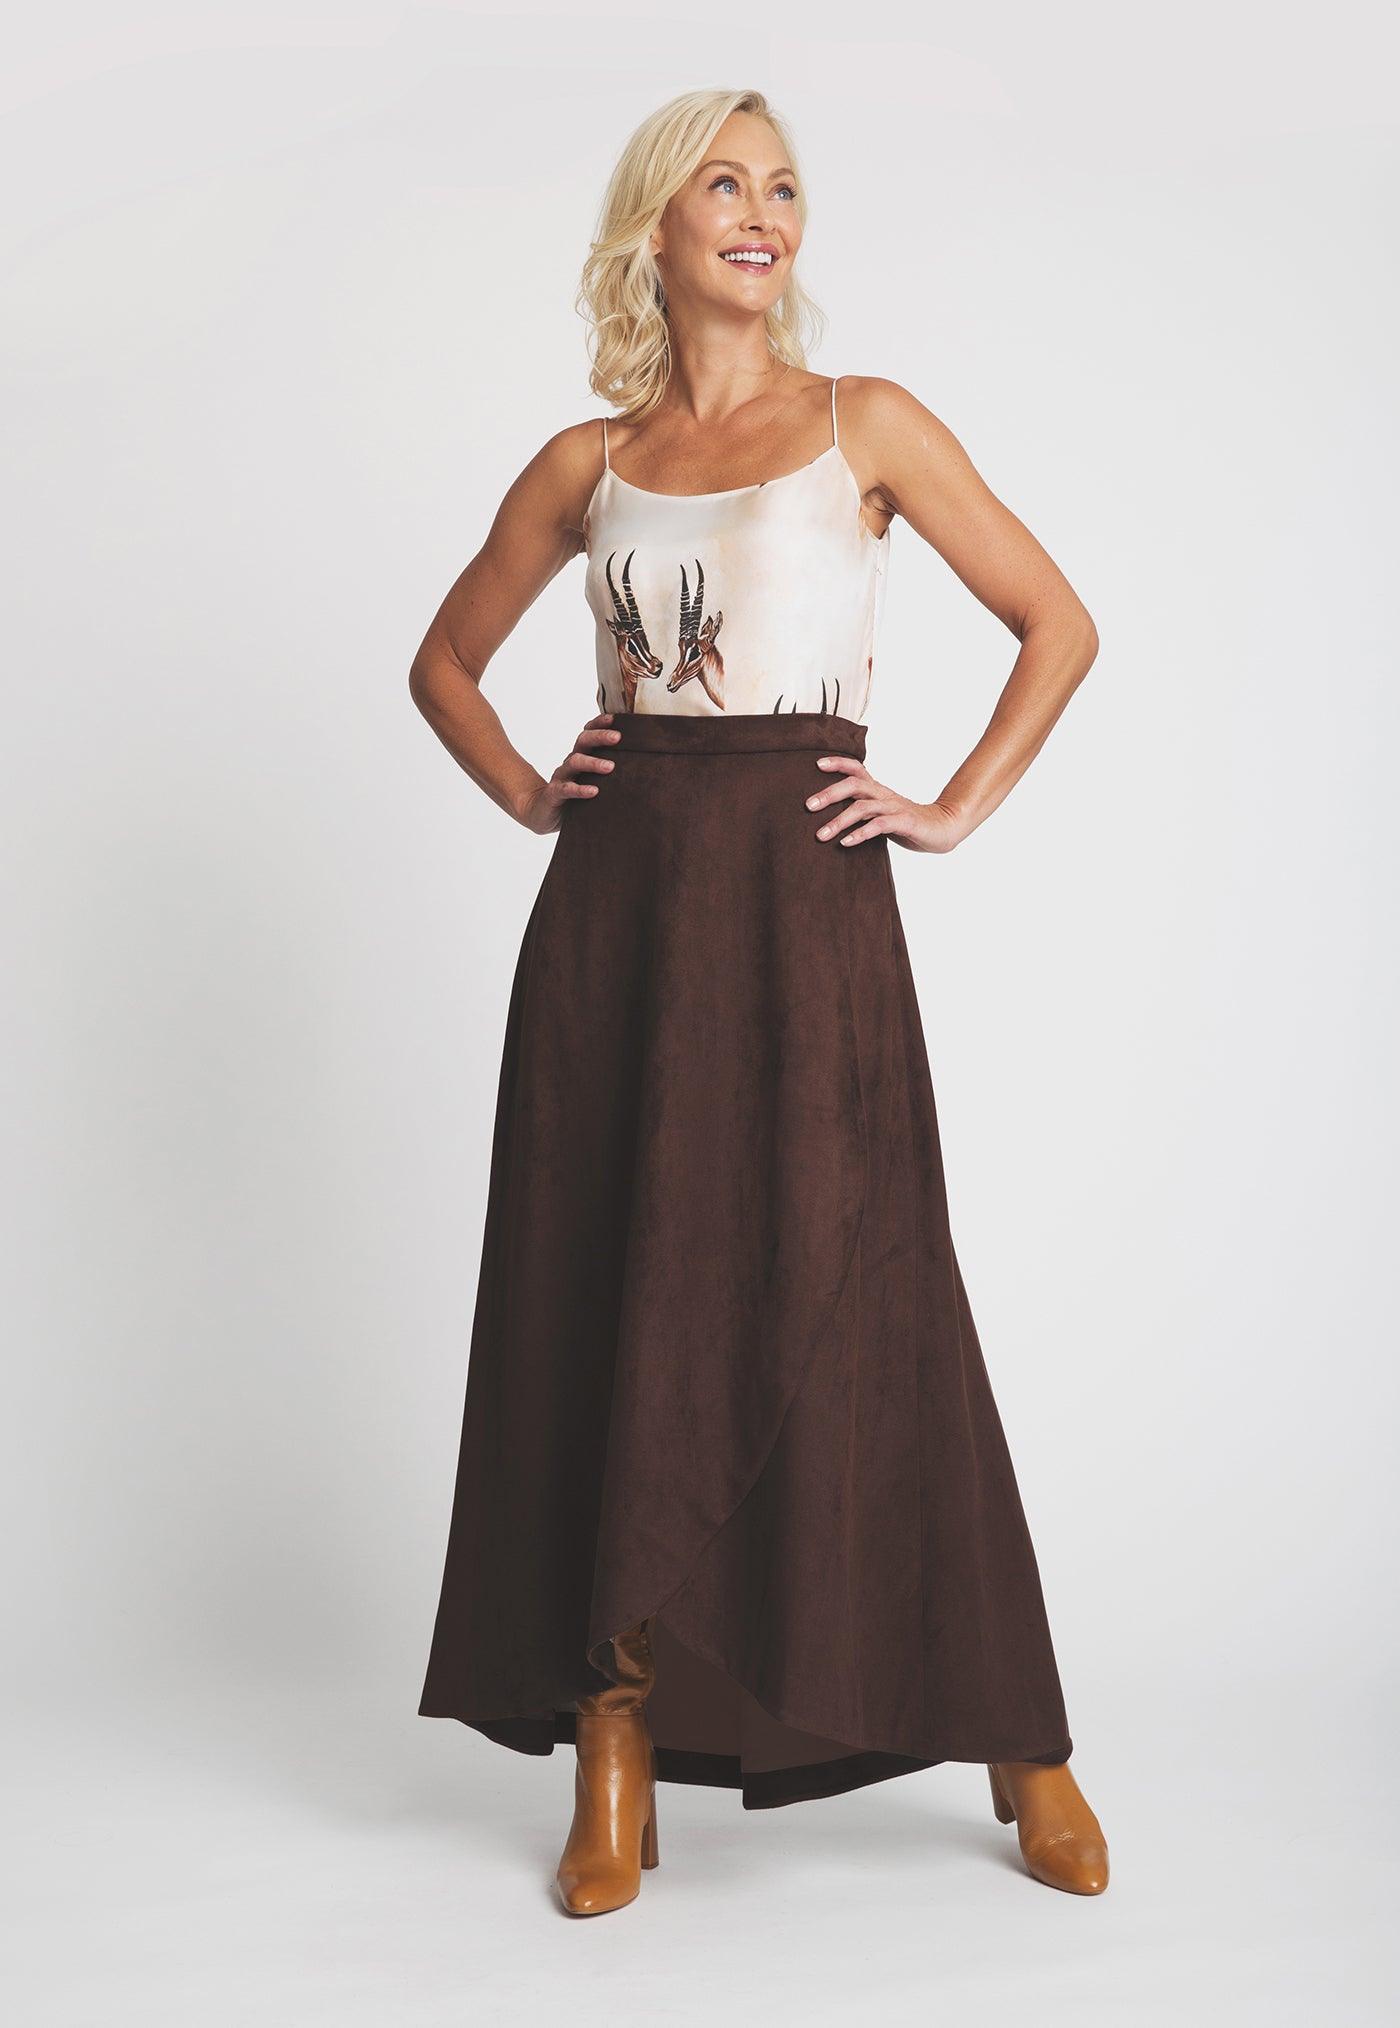 silk camisole with antelope print with brown suede long skirt